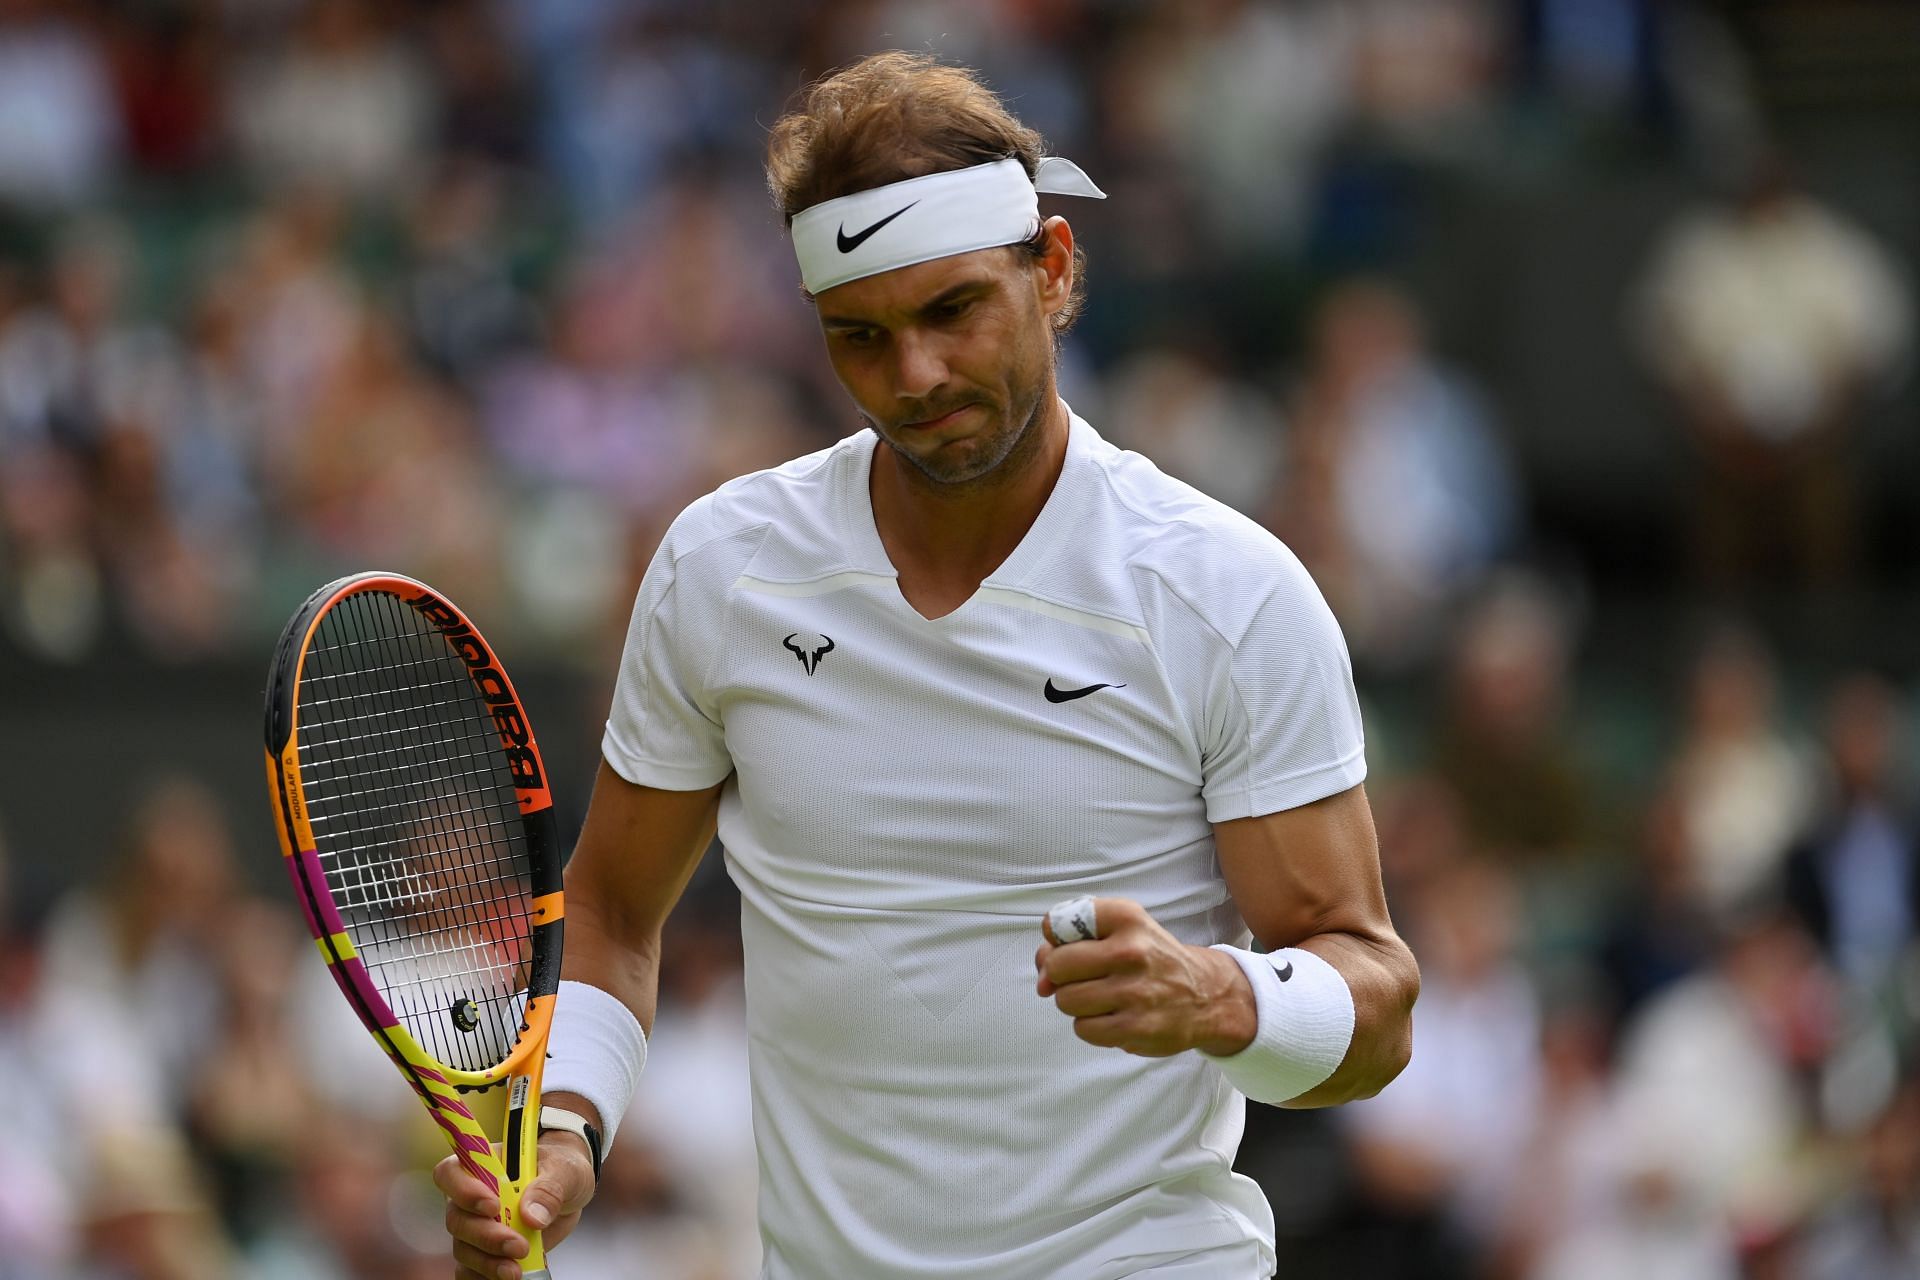 Rafael Nadal will play his fourth-round match at Wimbledon on Day 8 